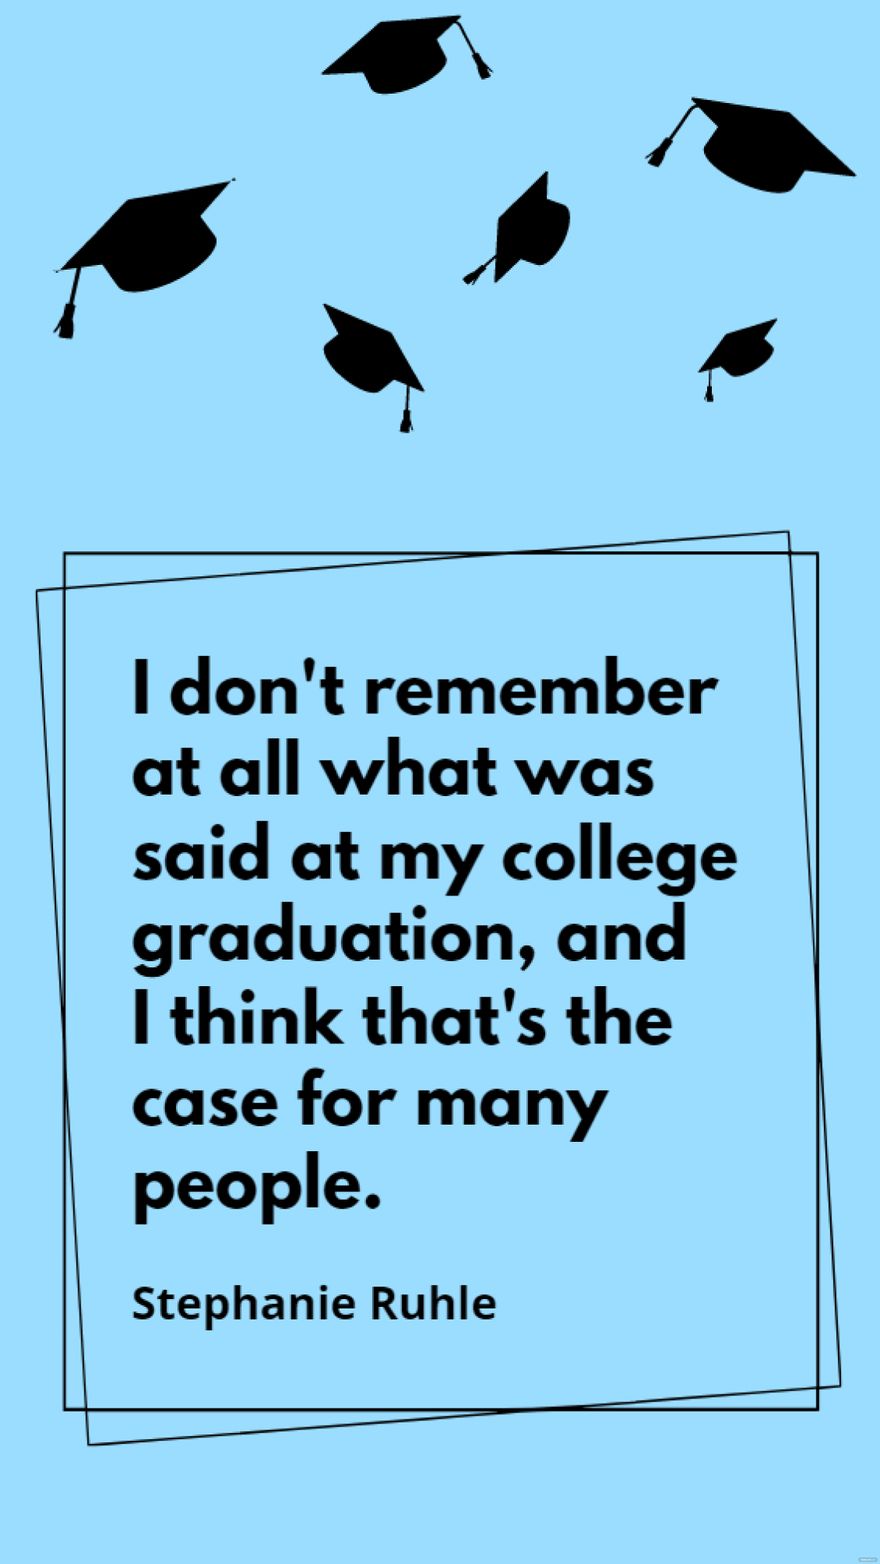 Free Stephanie Ruhle - I don't remember at all what was said at my college graduation, and I think that's the case for many people. in JPG